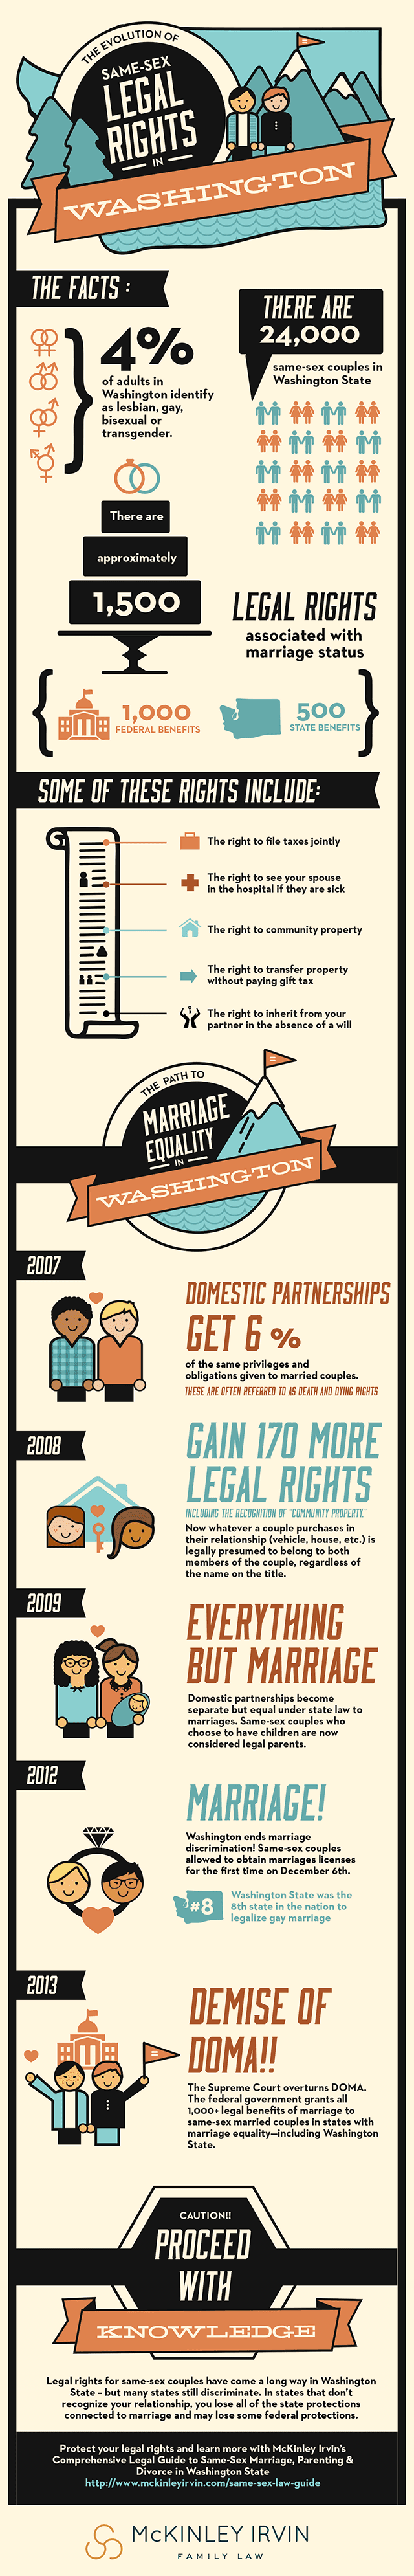 History of Same Sex Marriage Equality in Washington Infographic